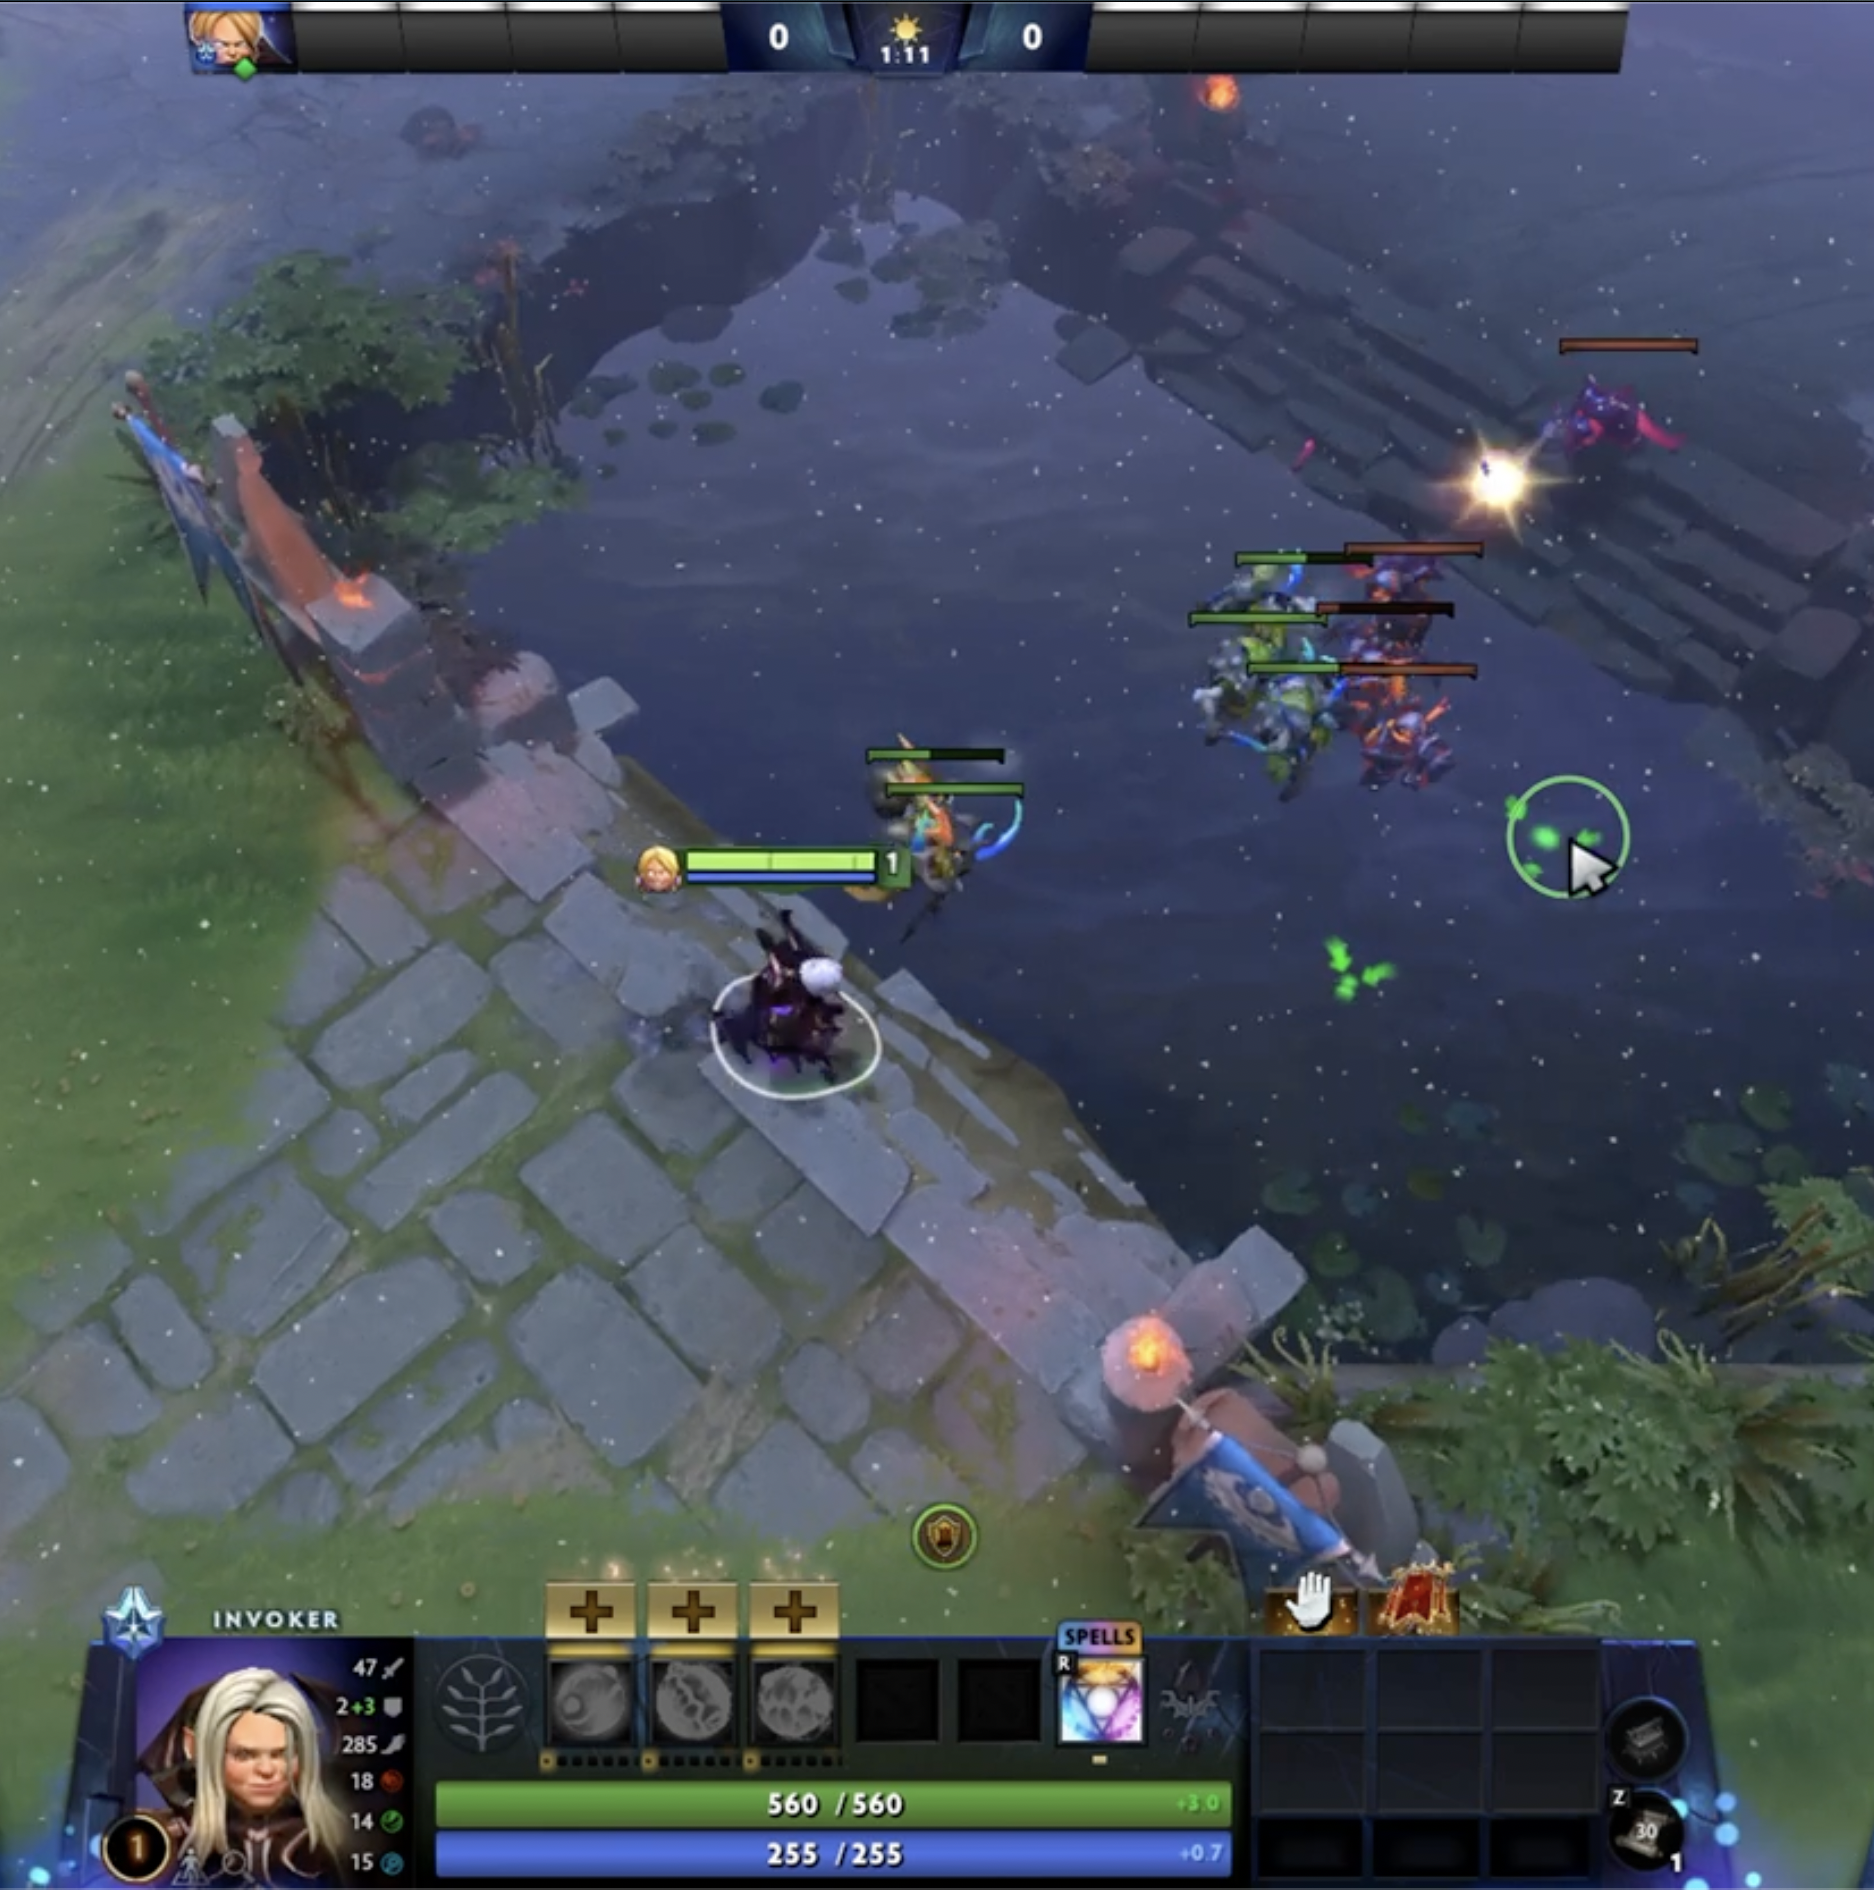 Camera's independence from the avatar in Dota2